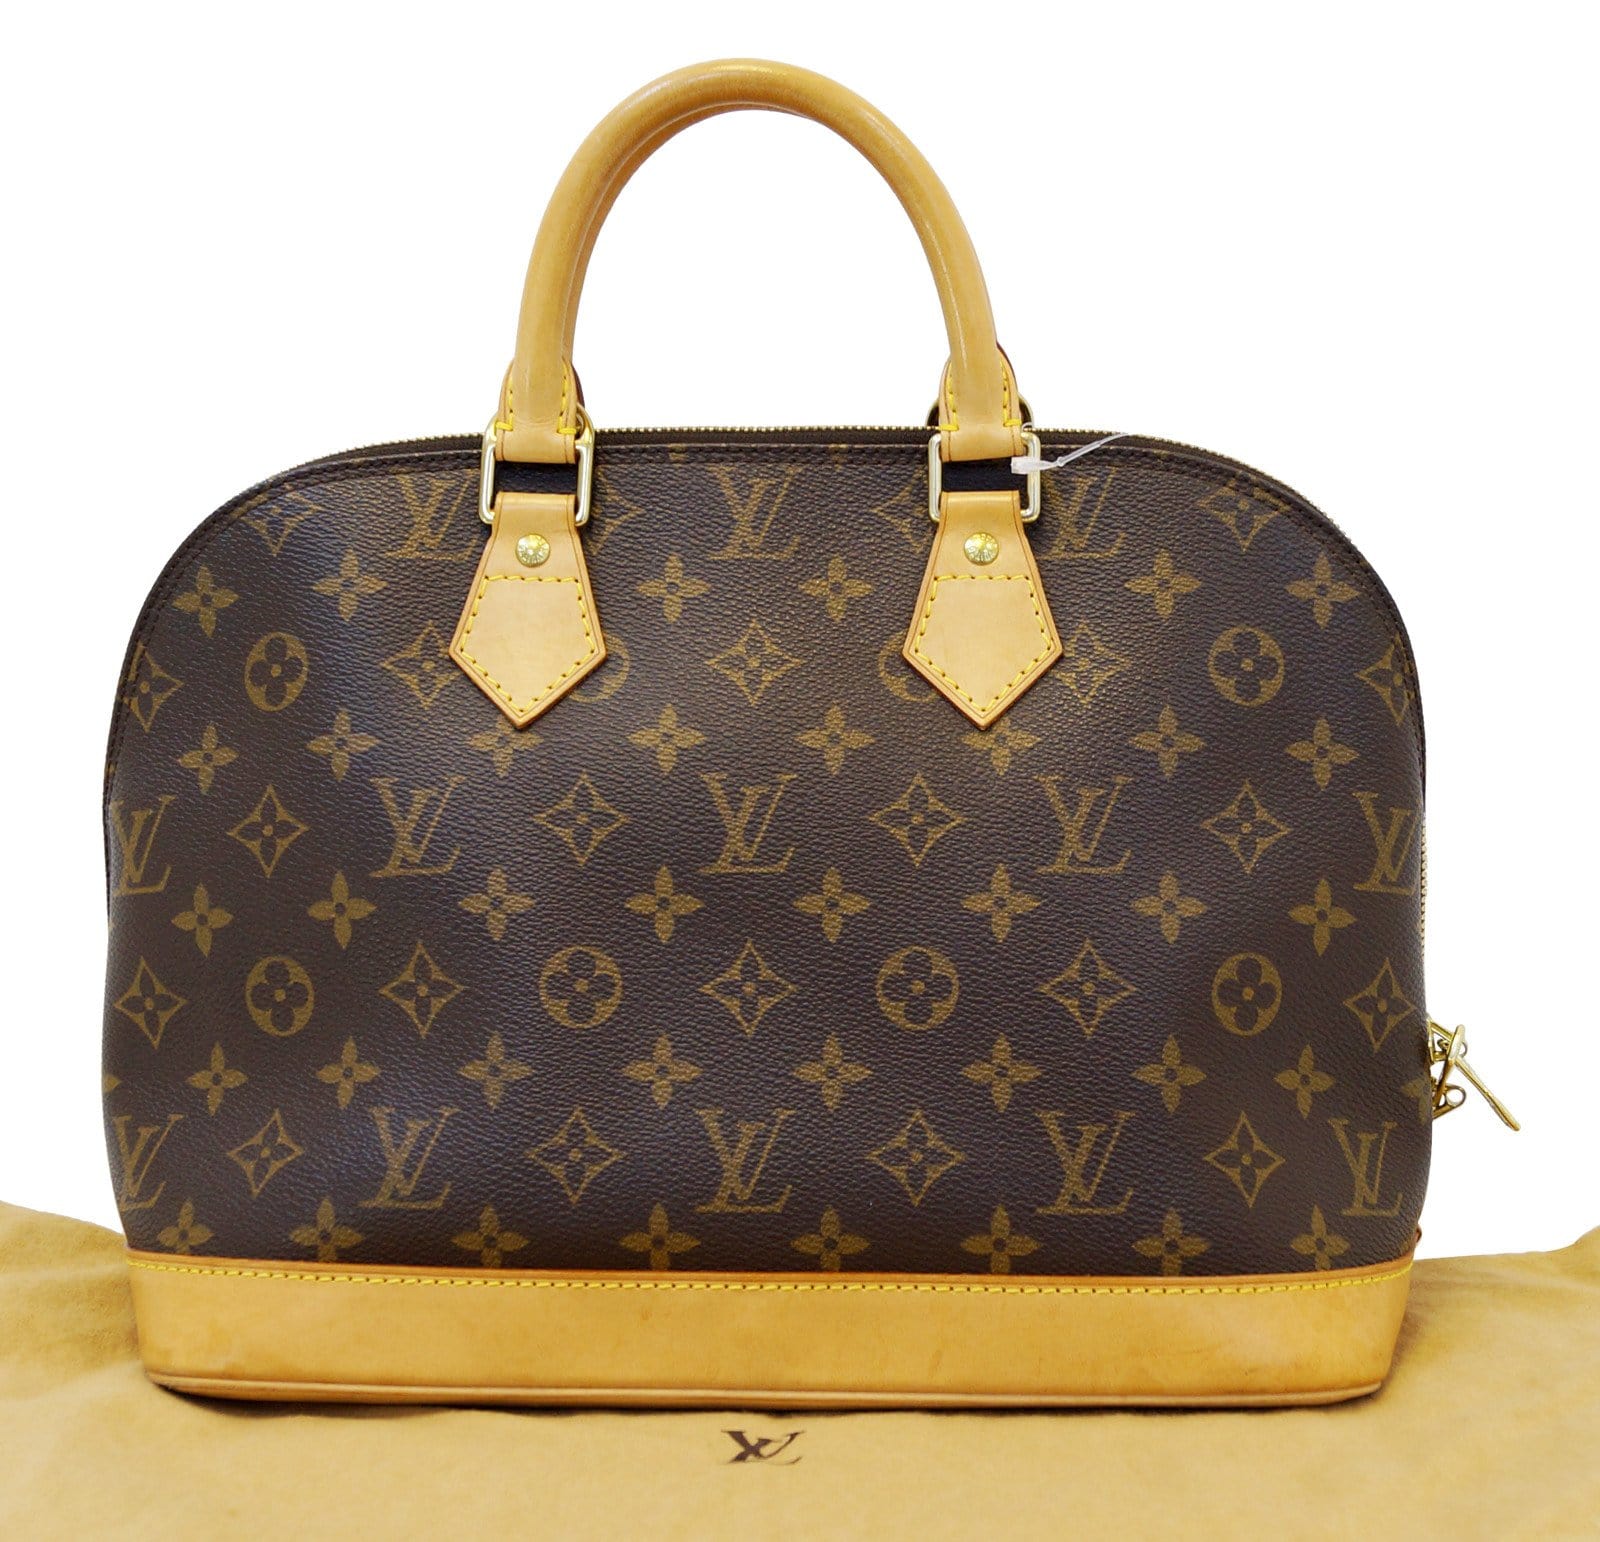 Louis Vuitton Women Handbags Alma Brown Leather For Sale at